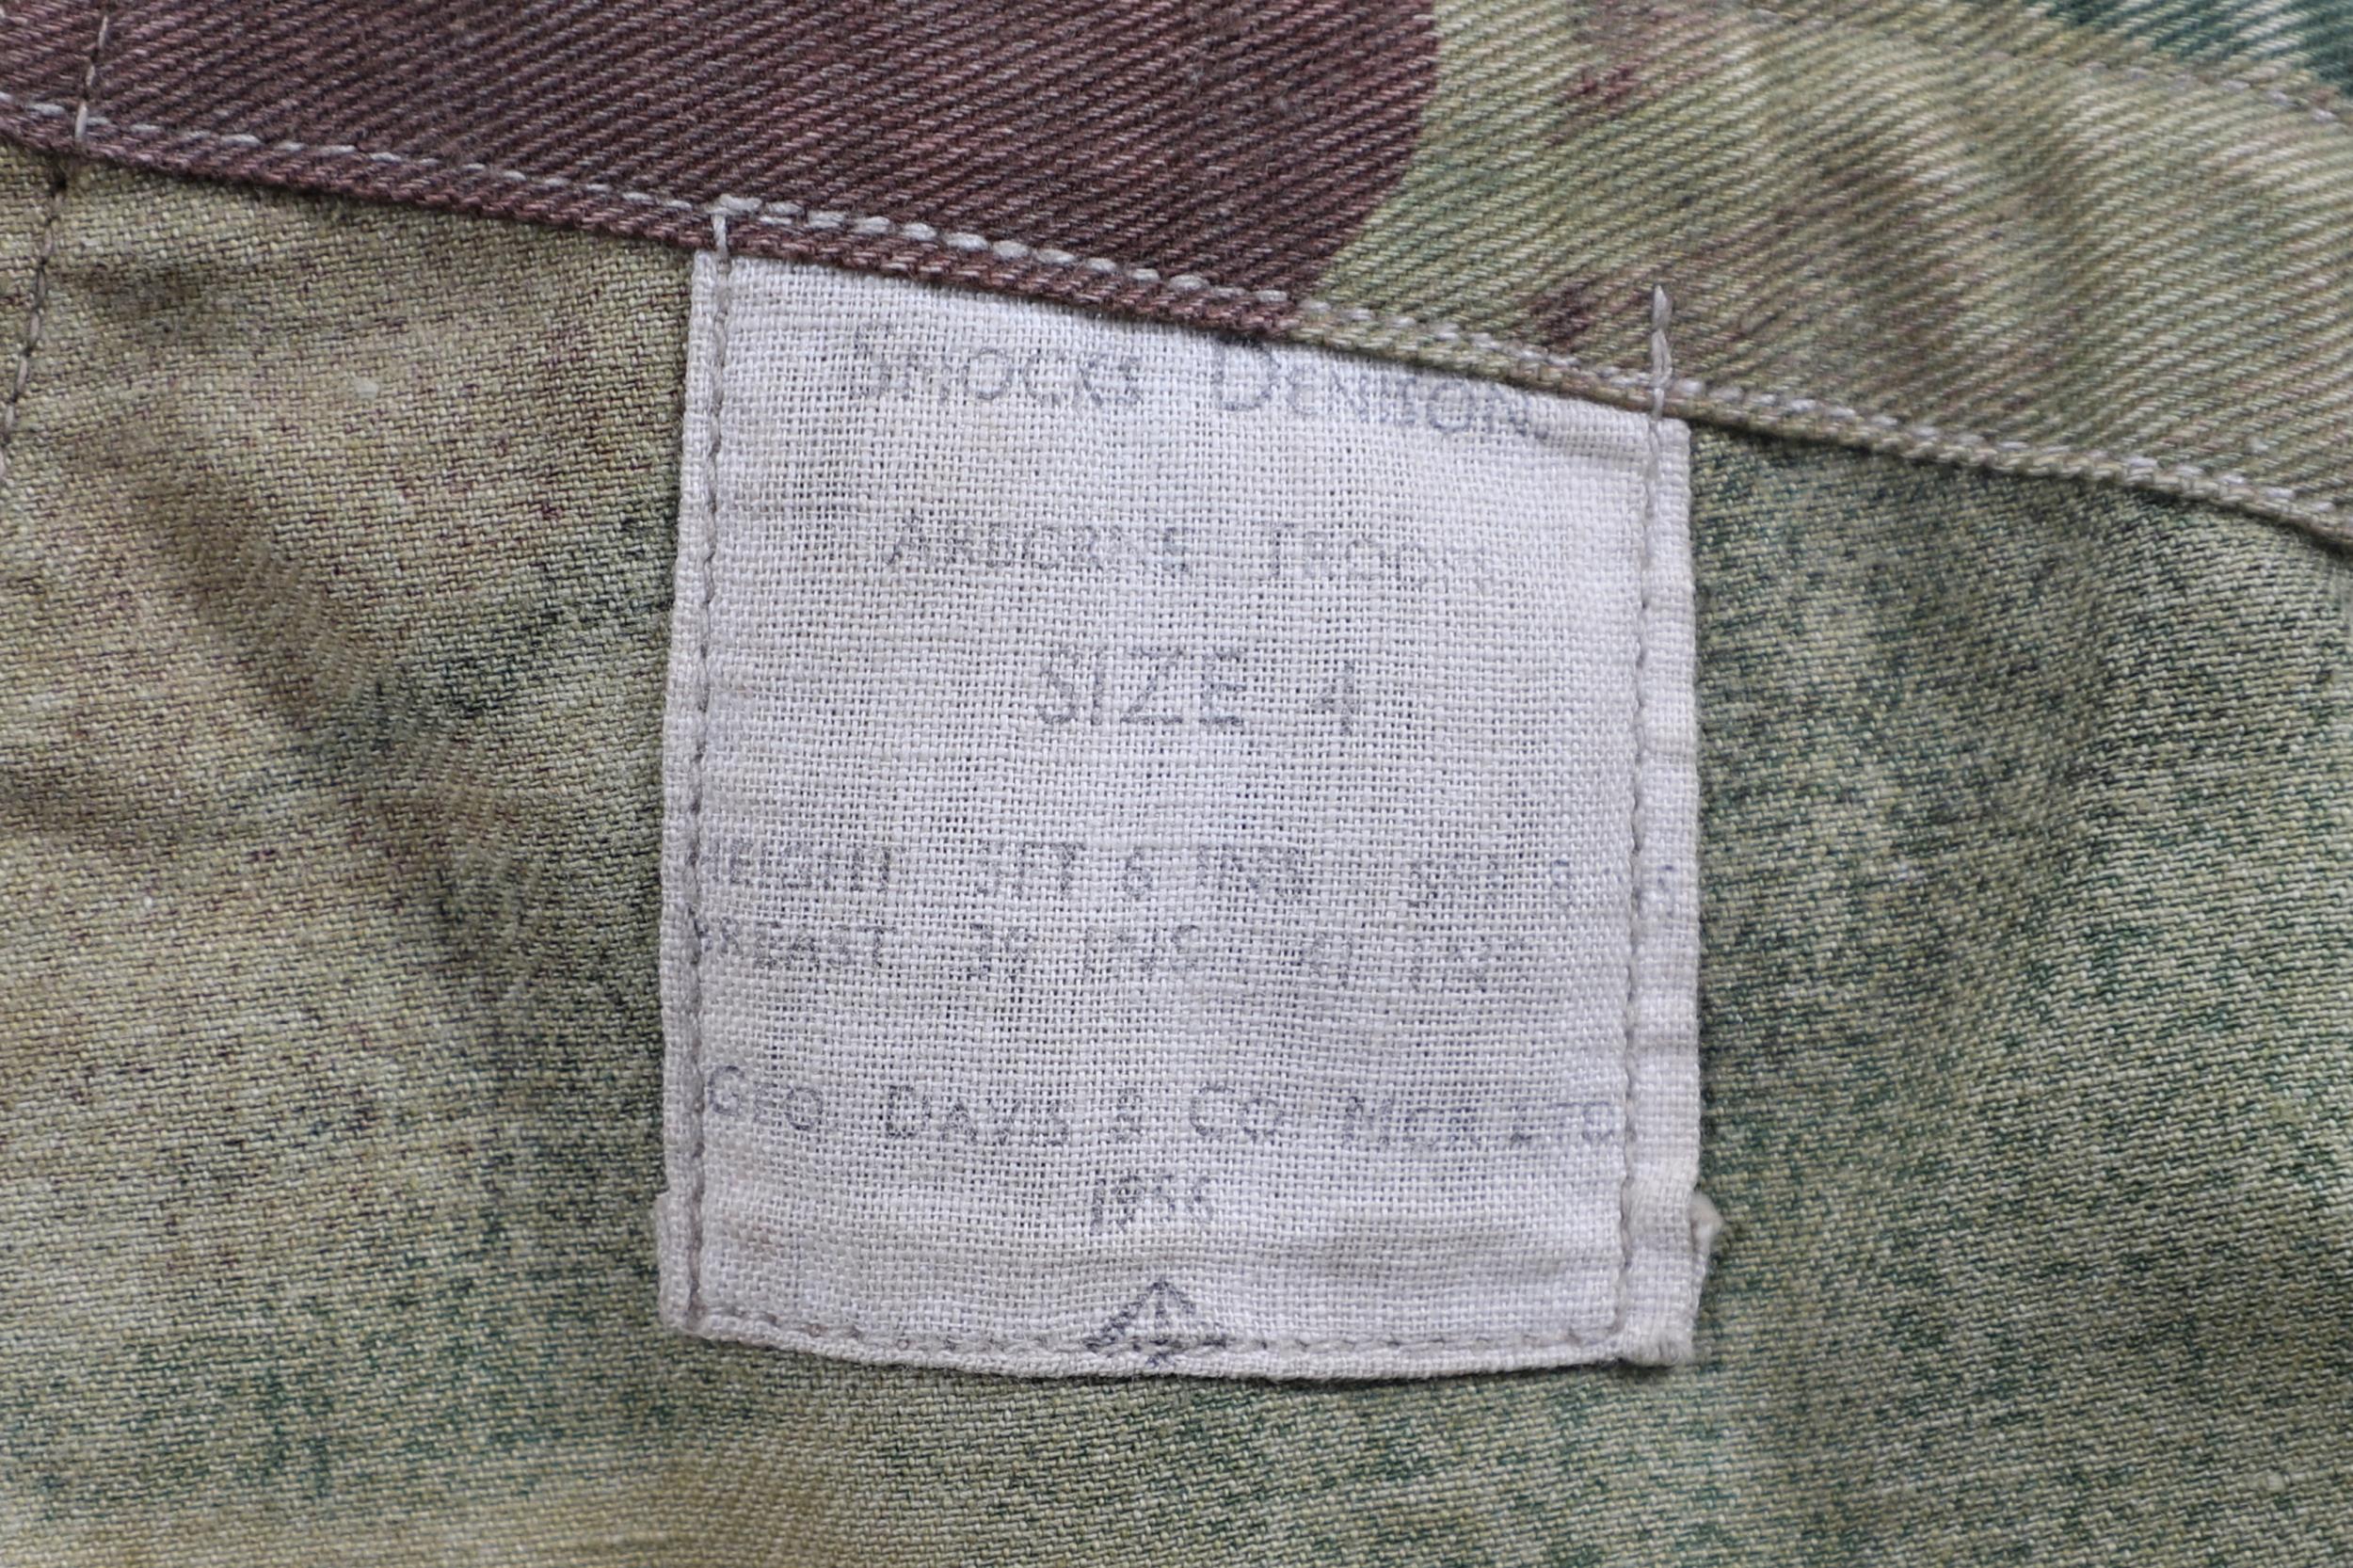 A DENISON SMOCK, SIZE 4, DATED 1956. - Image 15 of 16